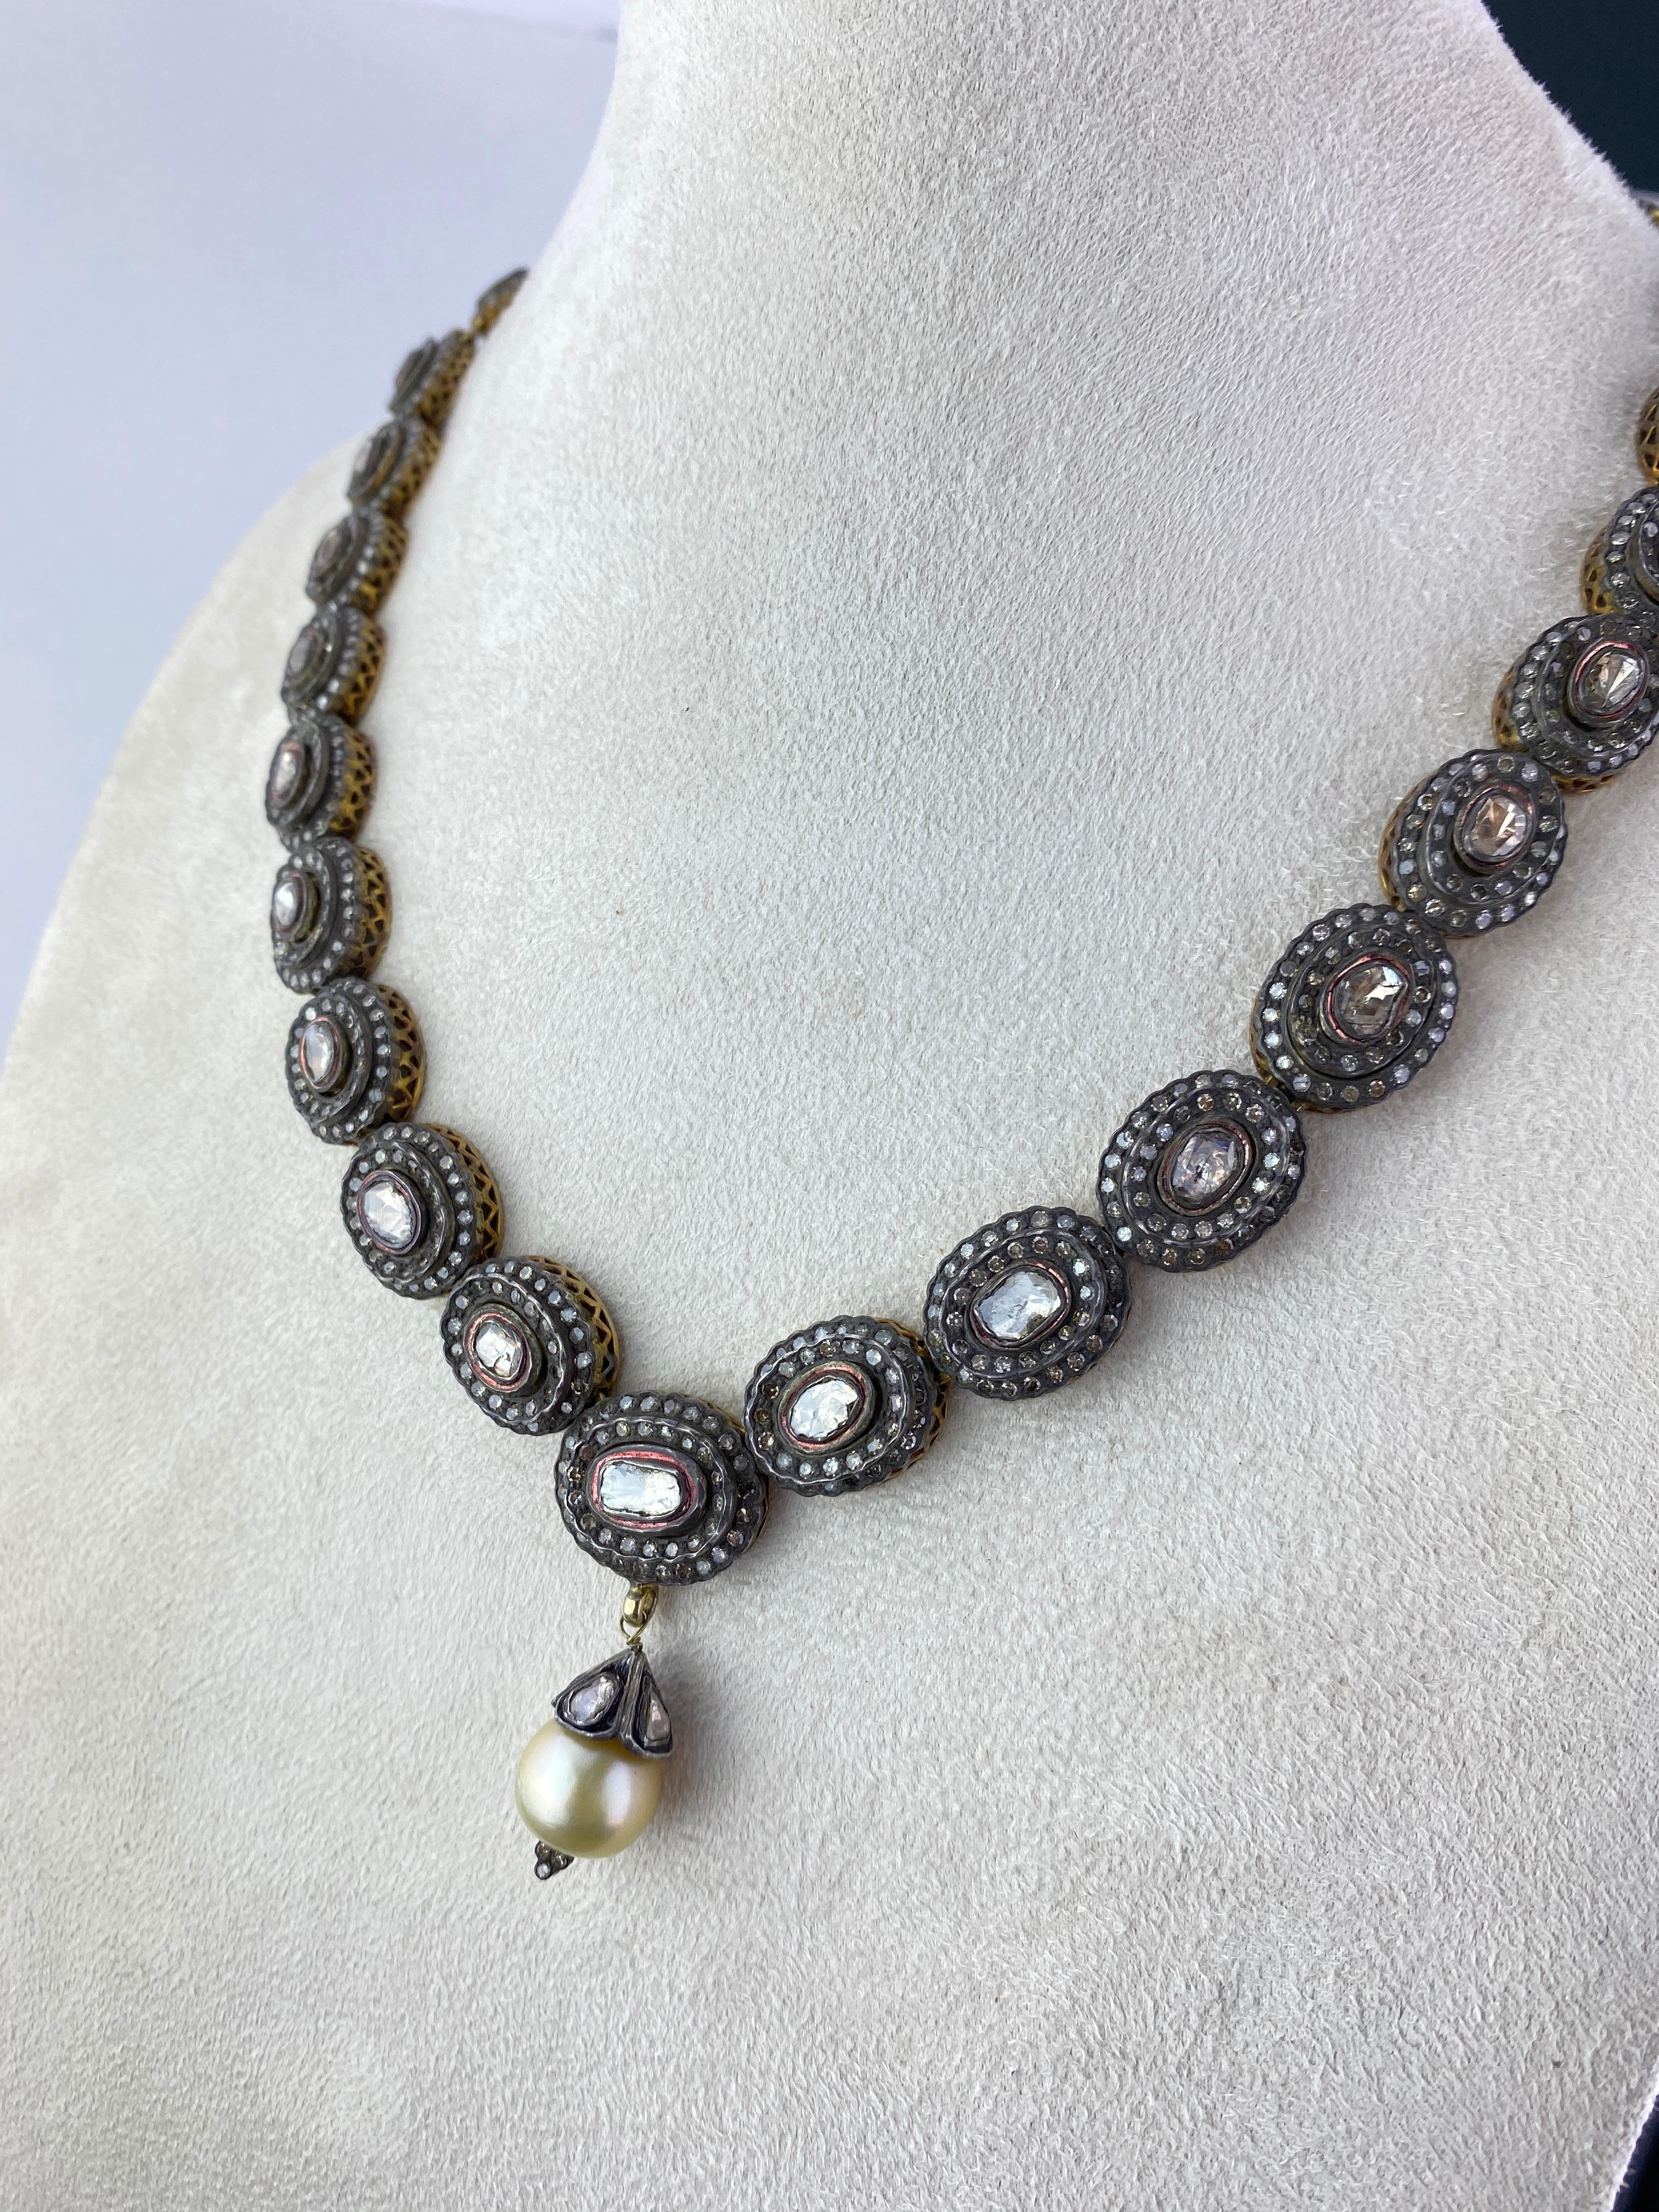 A classic Victorian style silver and gold Diamond necklace. The length of the chain is 19 inches, with a south sea pearl pendant hanging from it. 